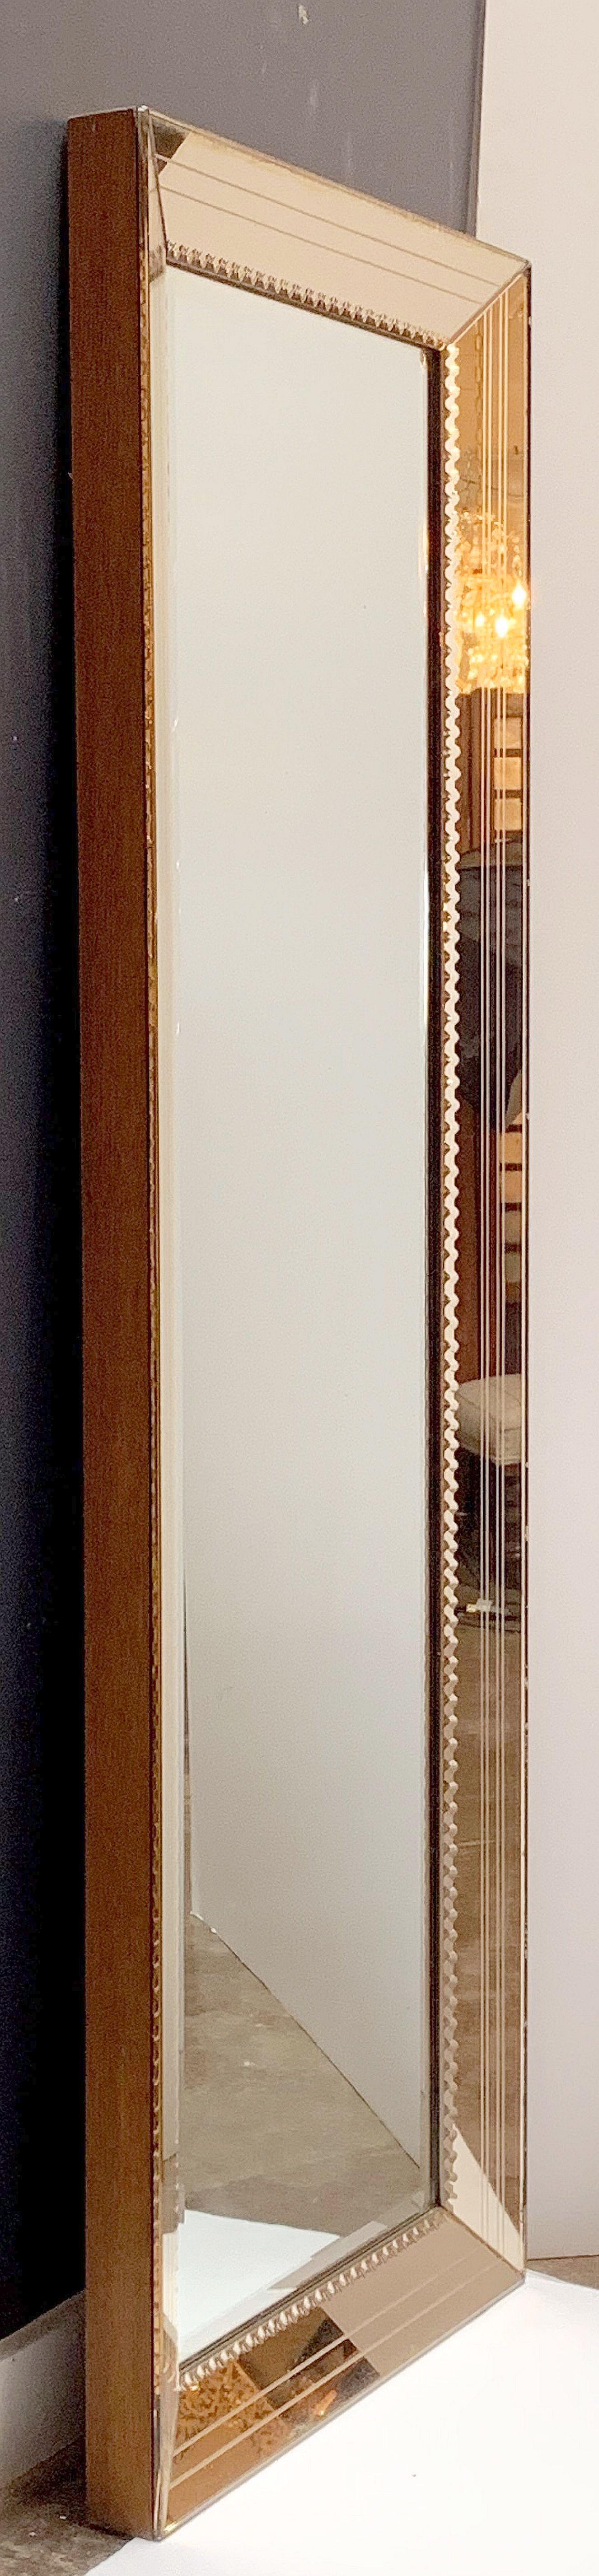 English Art Deco Mirror with Beveled Frame of Copper-Colored Glass (H 58 3/4 x W 19 3/4)